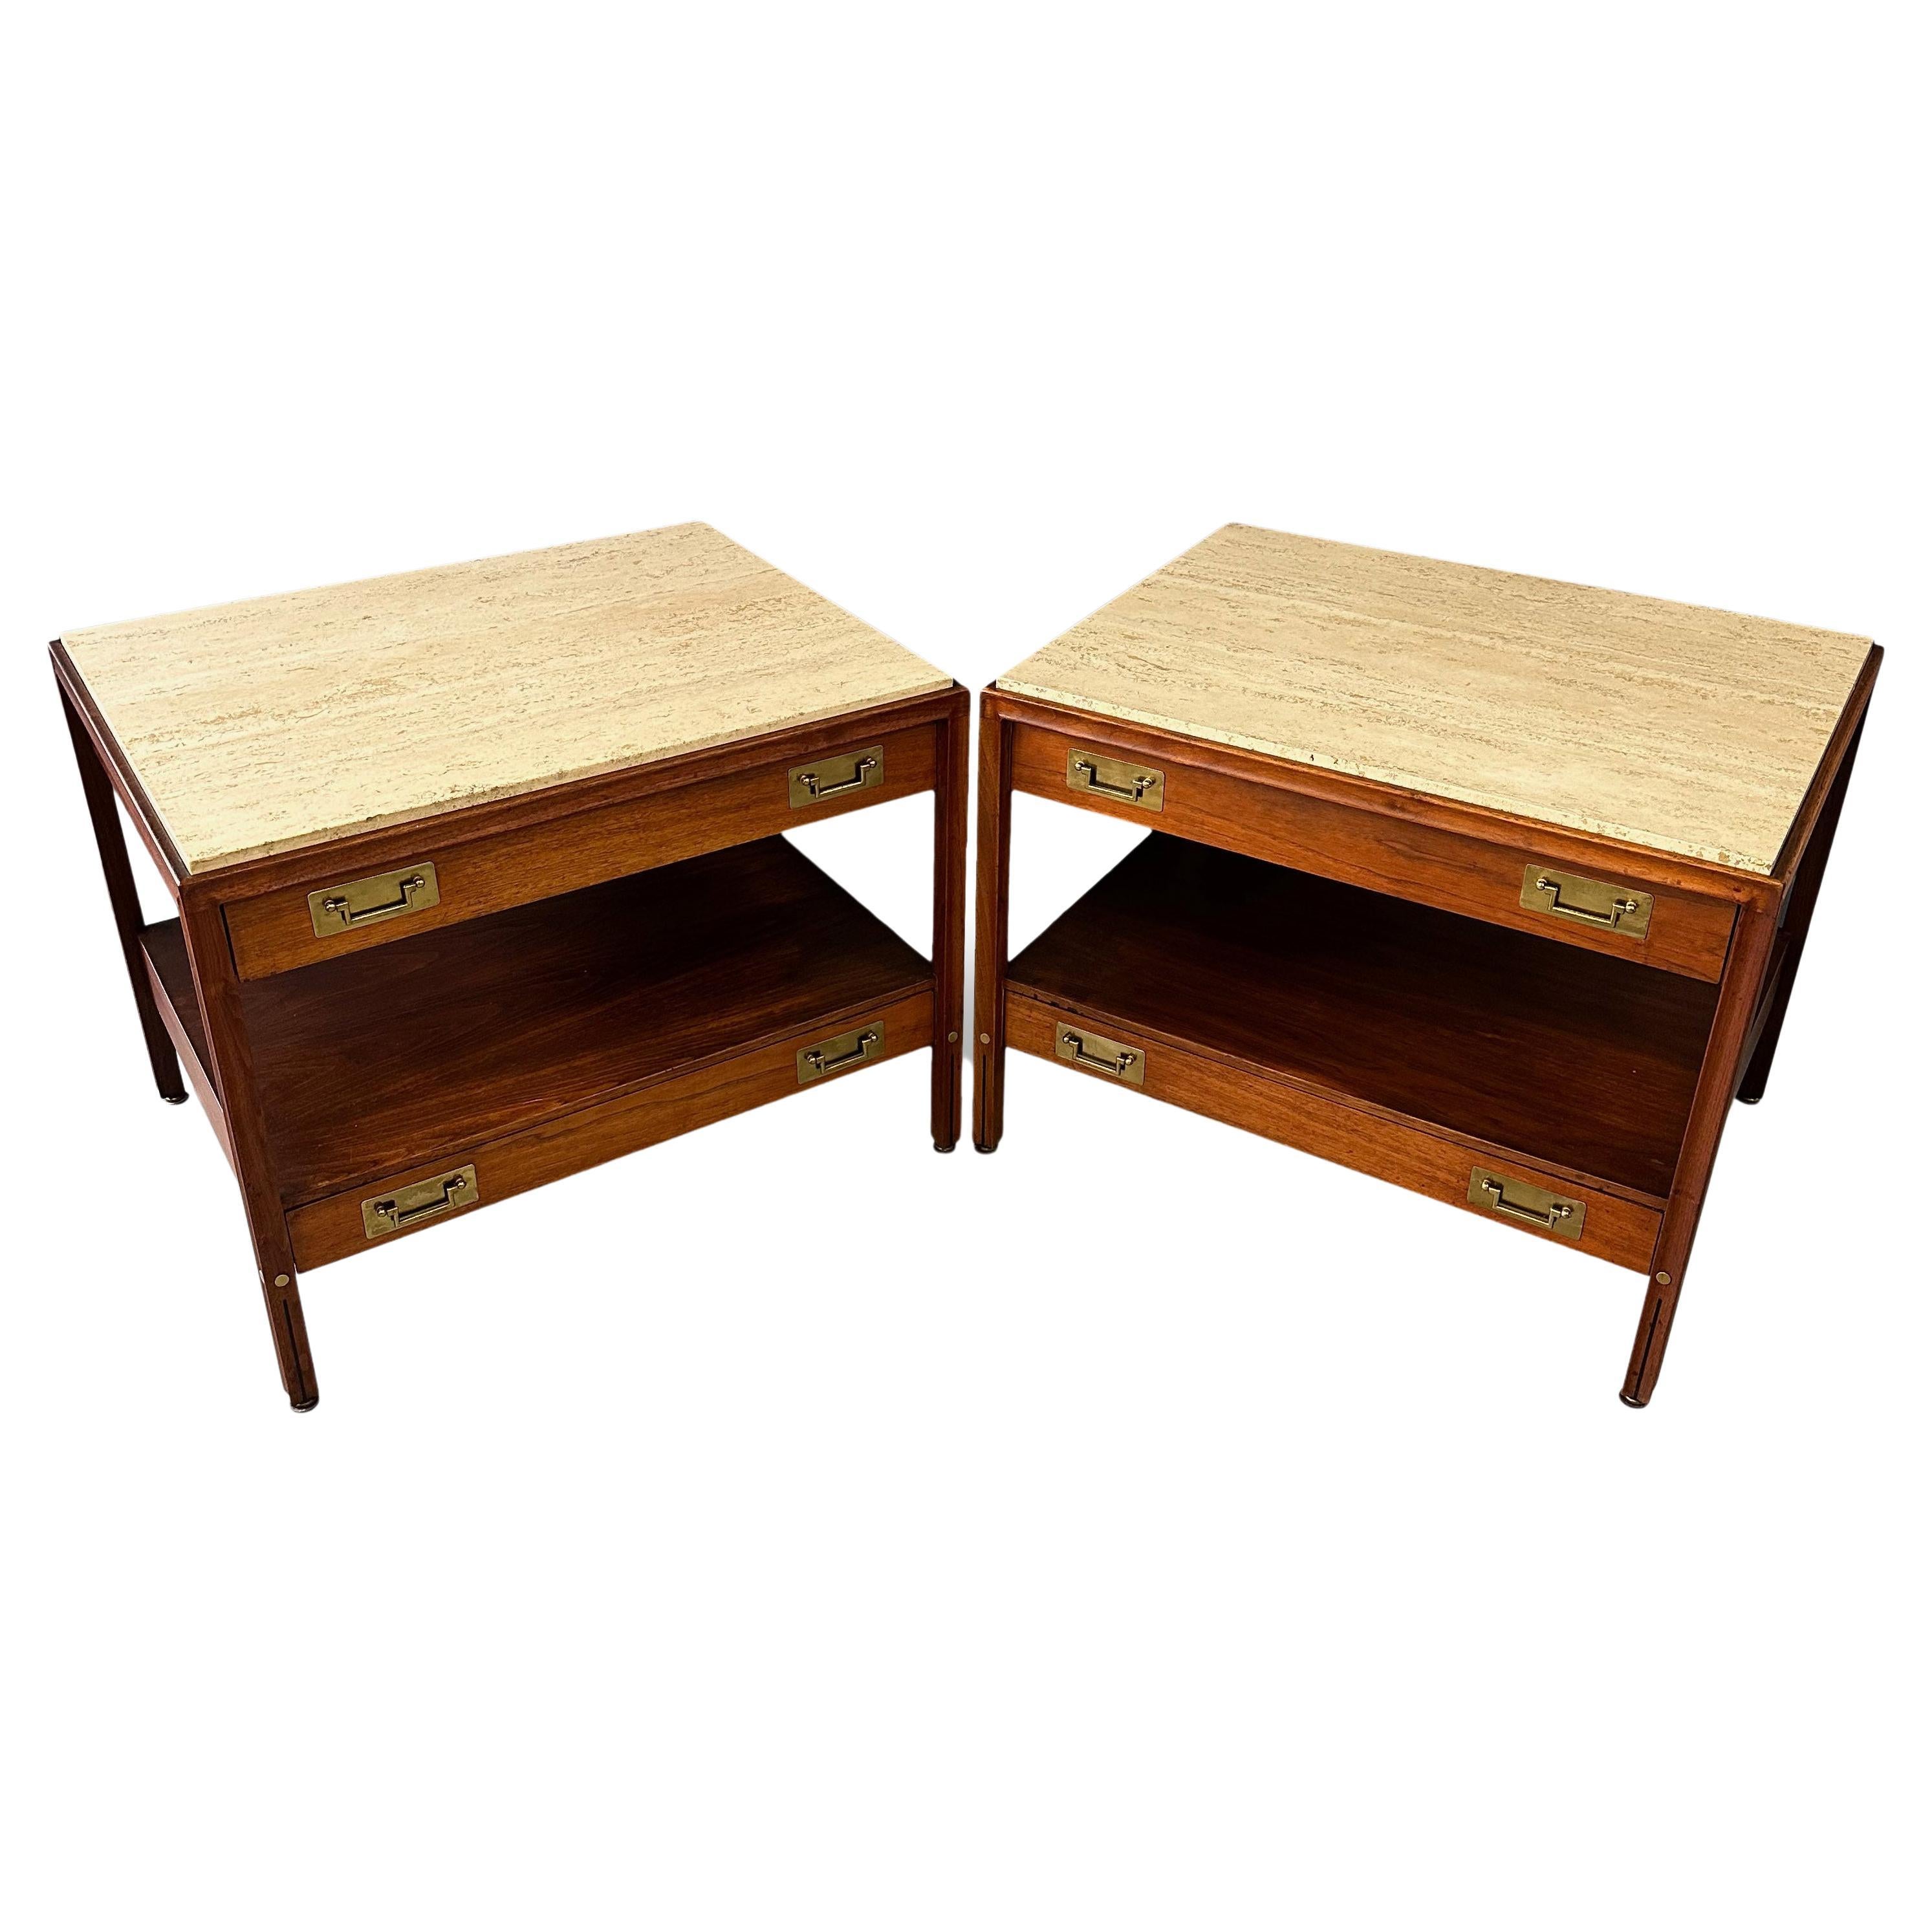 Pair of Walnut and Travertine Nightstands with Brass Accents and Rosewood Trim For Sale